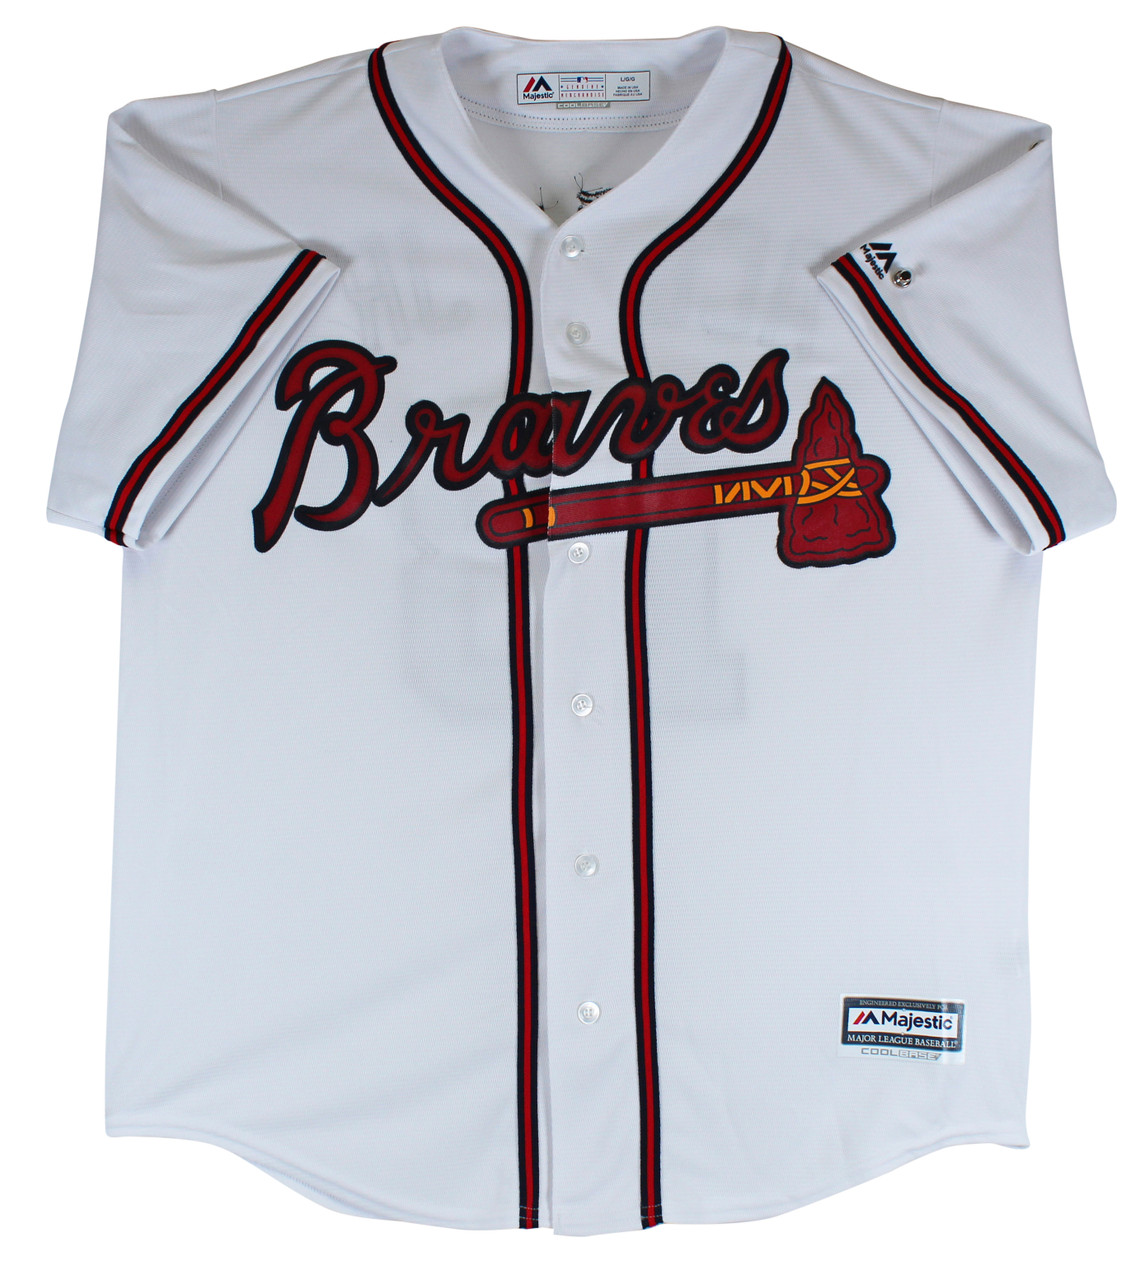 Atlanta Braves Ronald Acuna Jr. Autographed Majestic Cool Base White Jersey  Size L MLB Debut 4-25-18 Beckett BAS Stock #190025